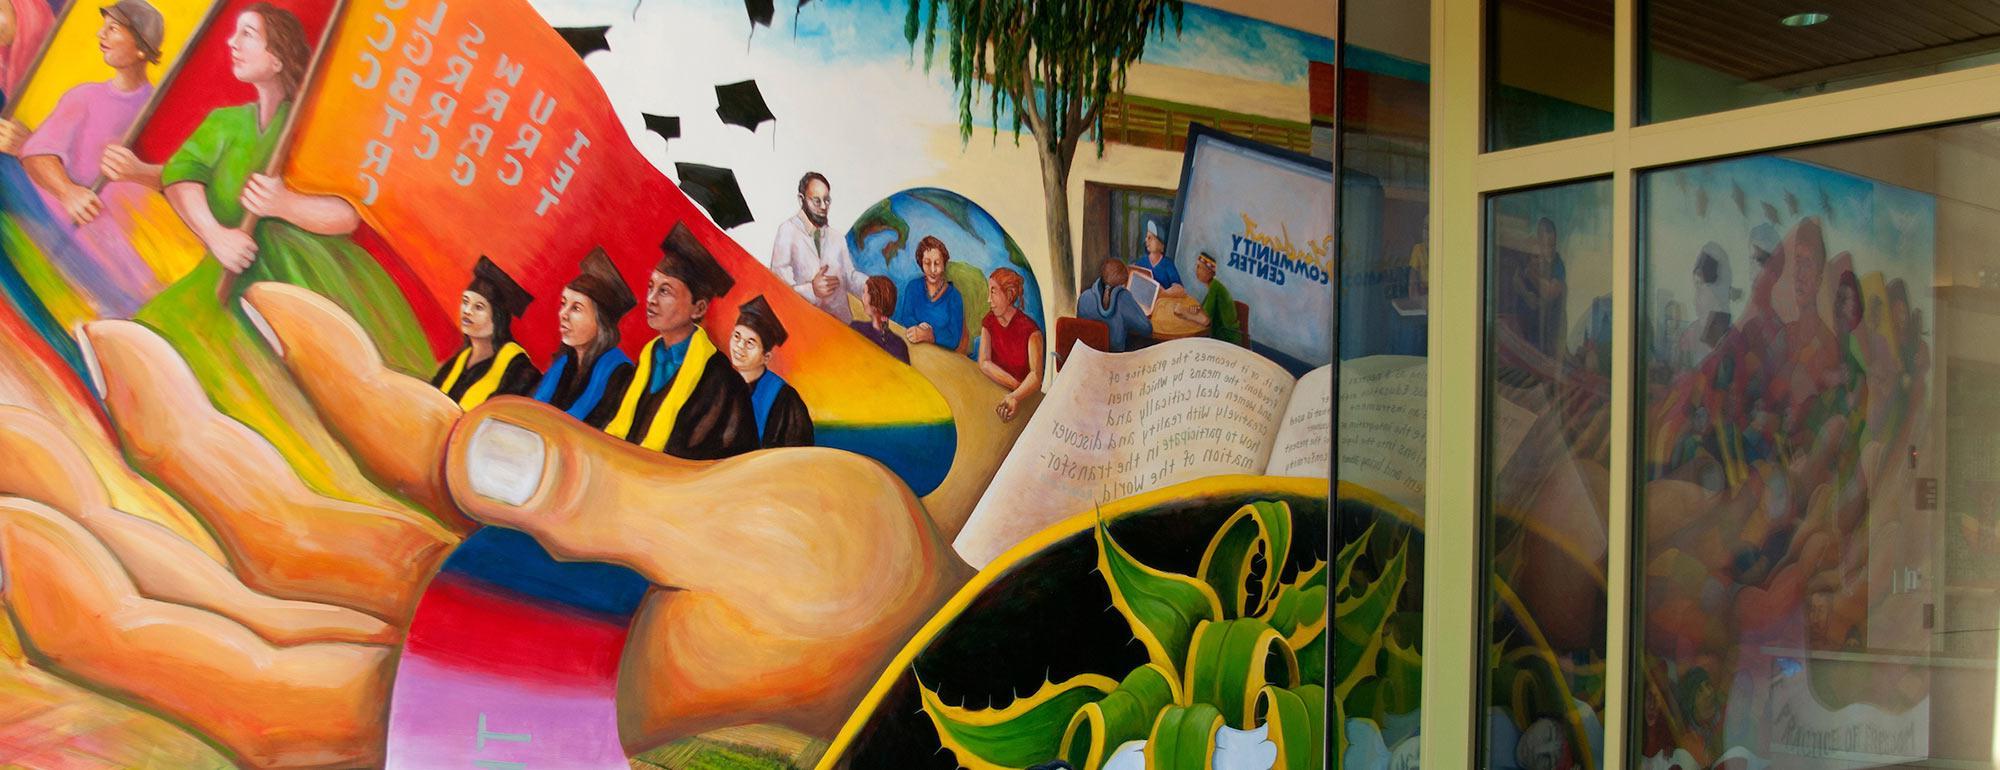 An image of a mural painted on the Student Community Center